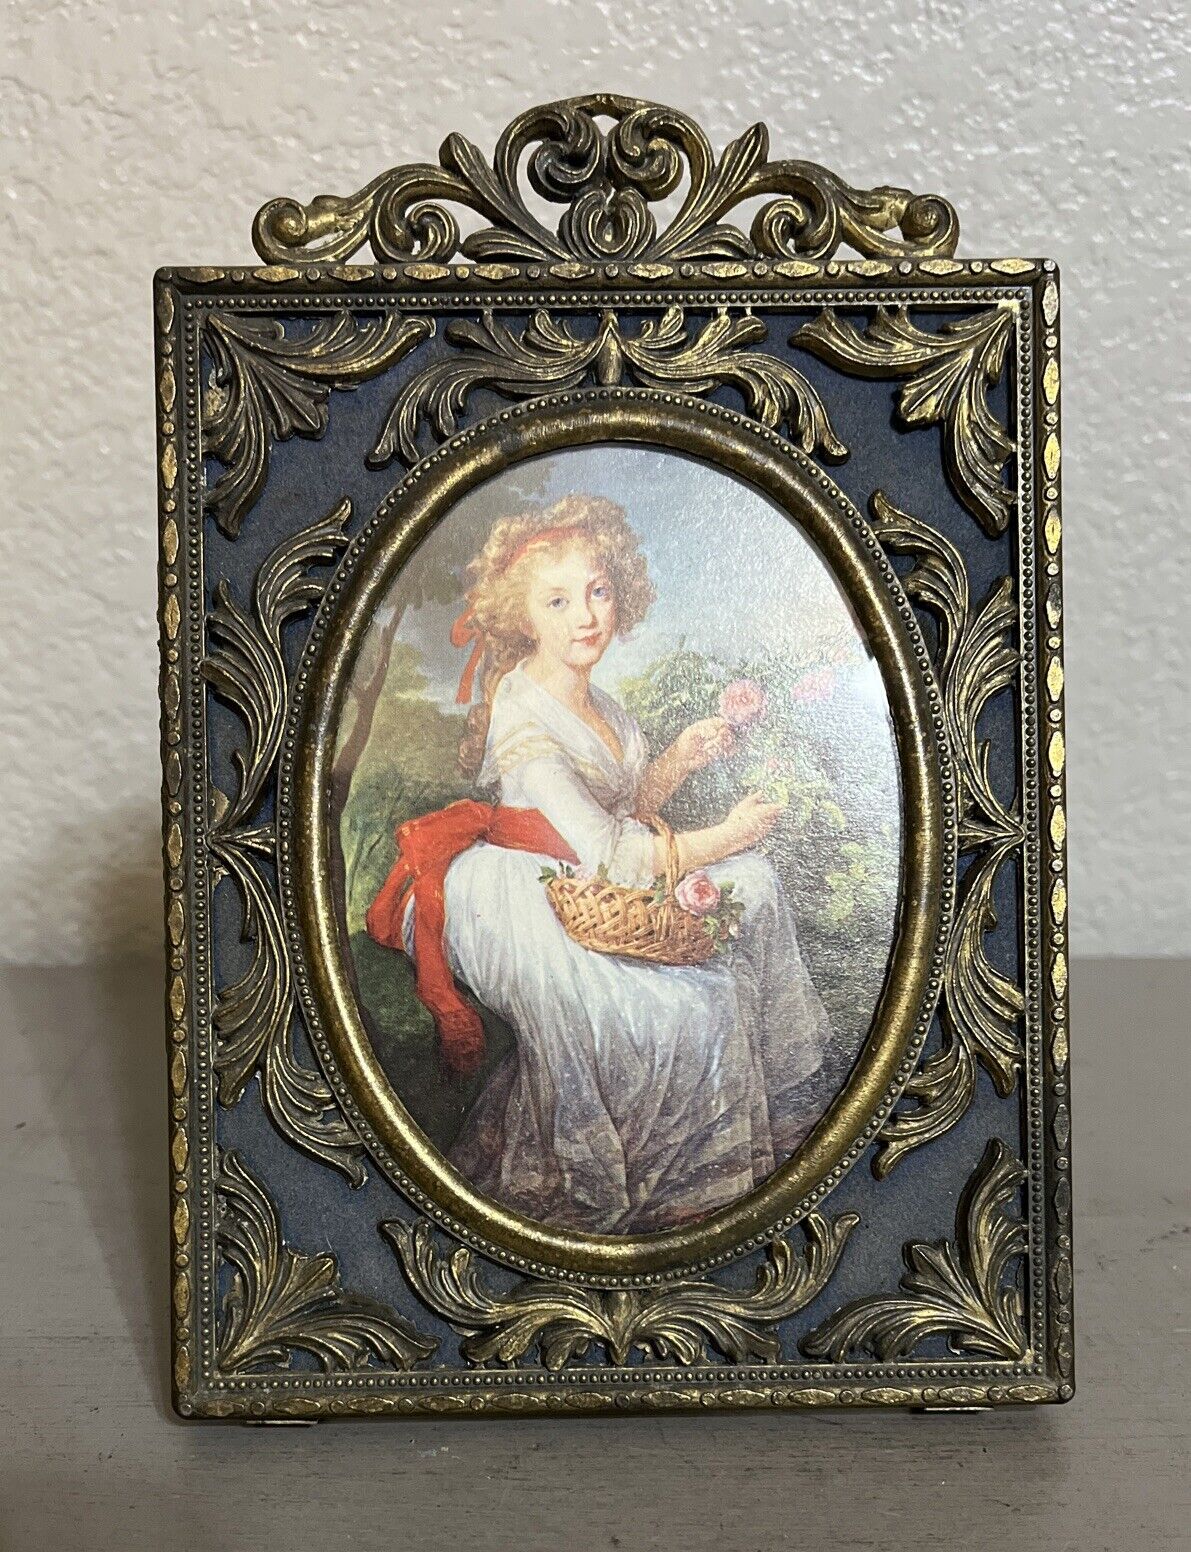 Vintage Ornate Metal Brass Filigree Picture Frame With Oval Picture